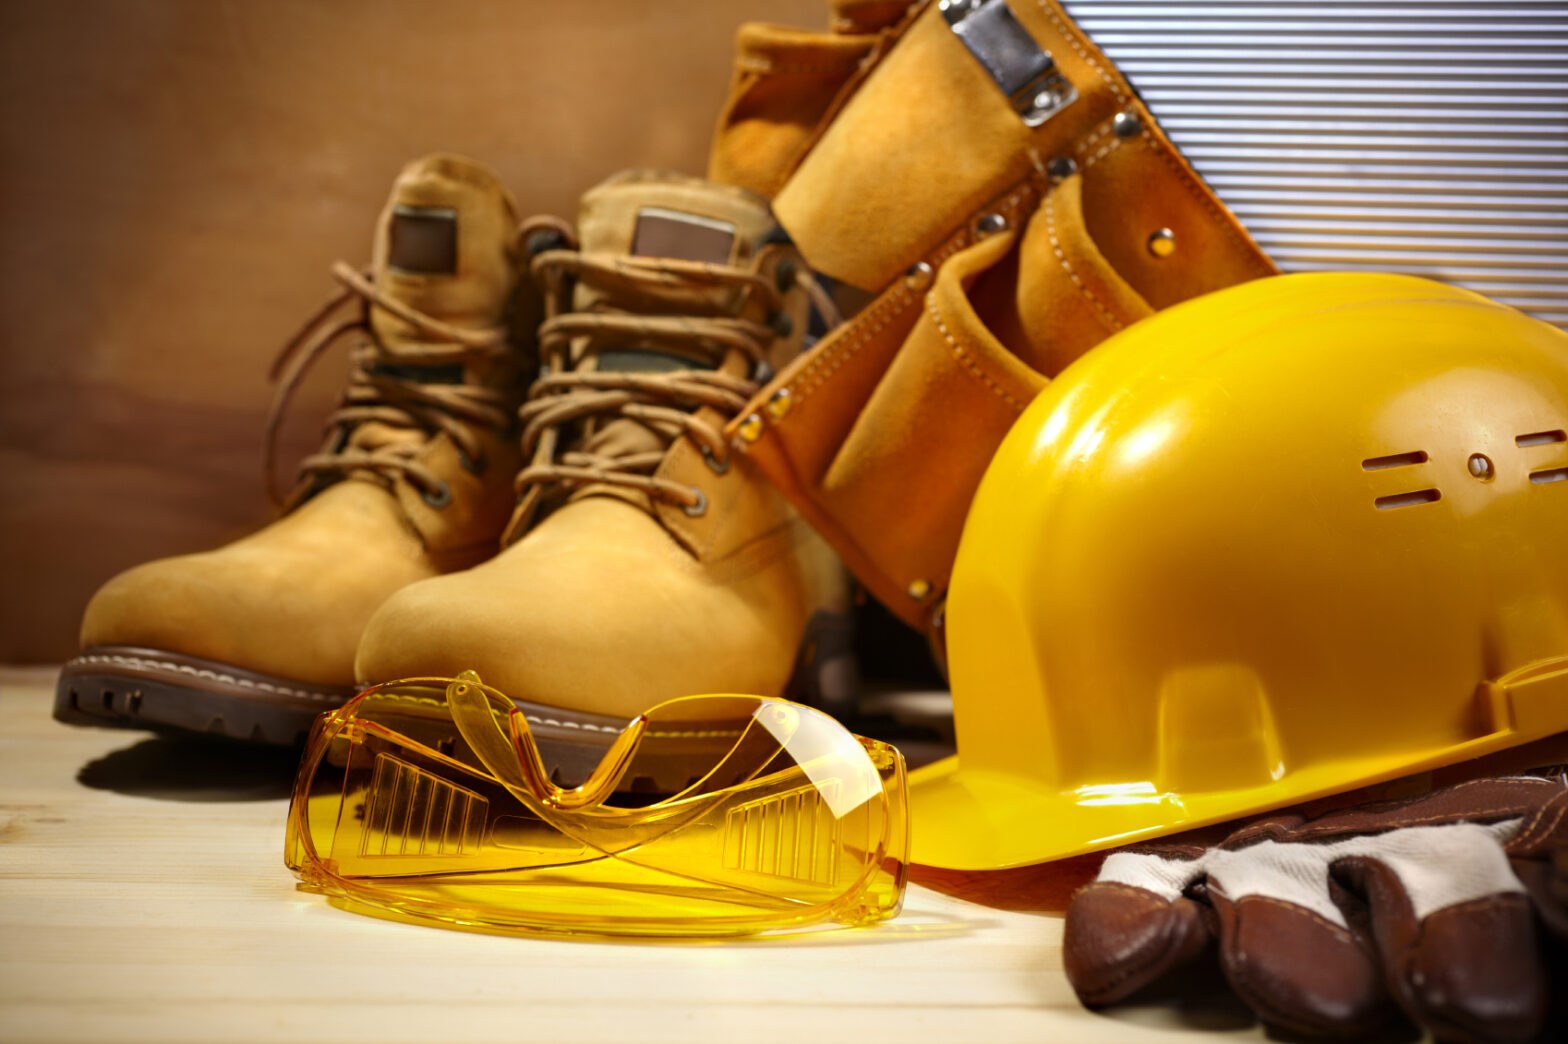 Industrial and Workplace Safety Market